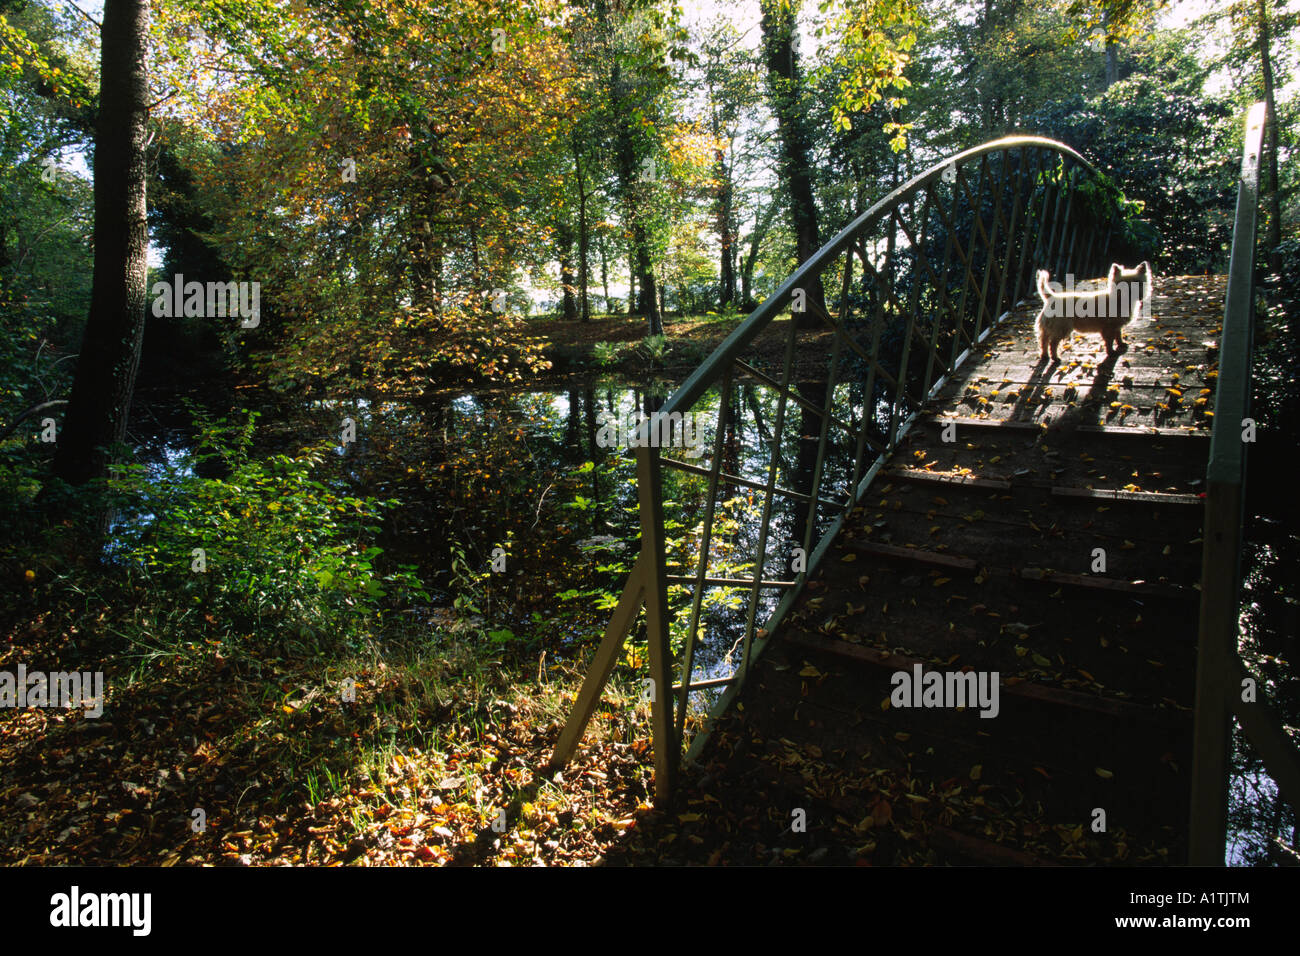 Dog on a bridge over a woodland pool in Autumn. Glansevern Gardens, Powys, Wales, UK. Stock Photo